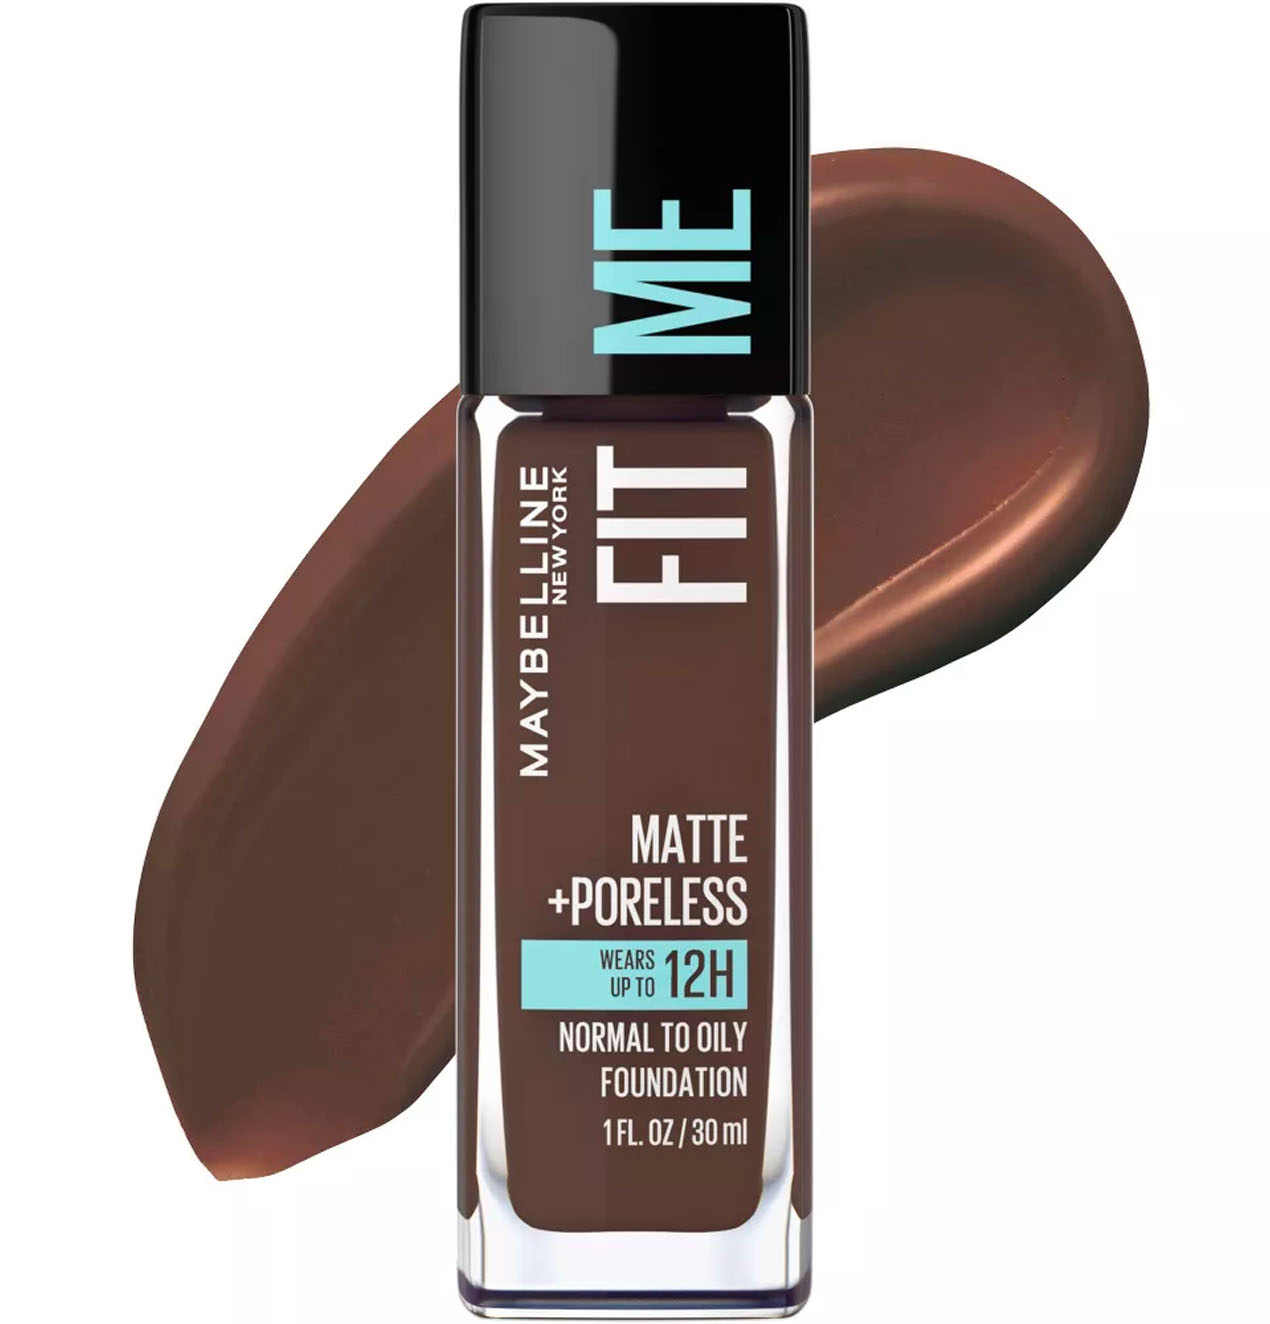 maybelline fit me foundation in shade 380 Espresso